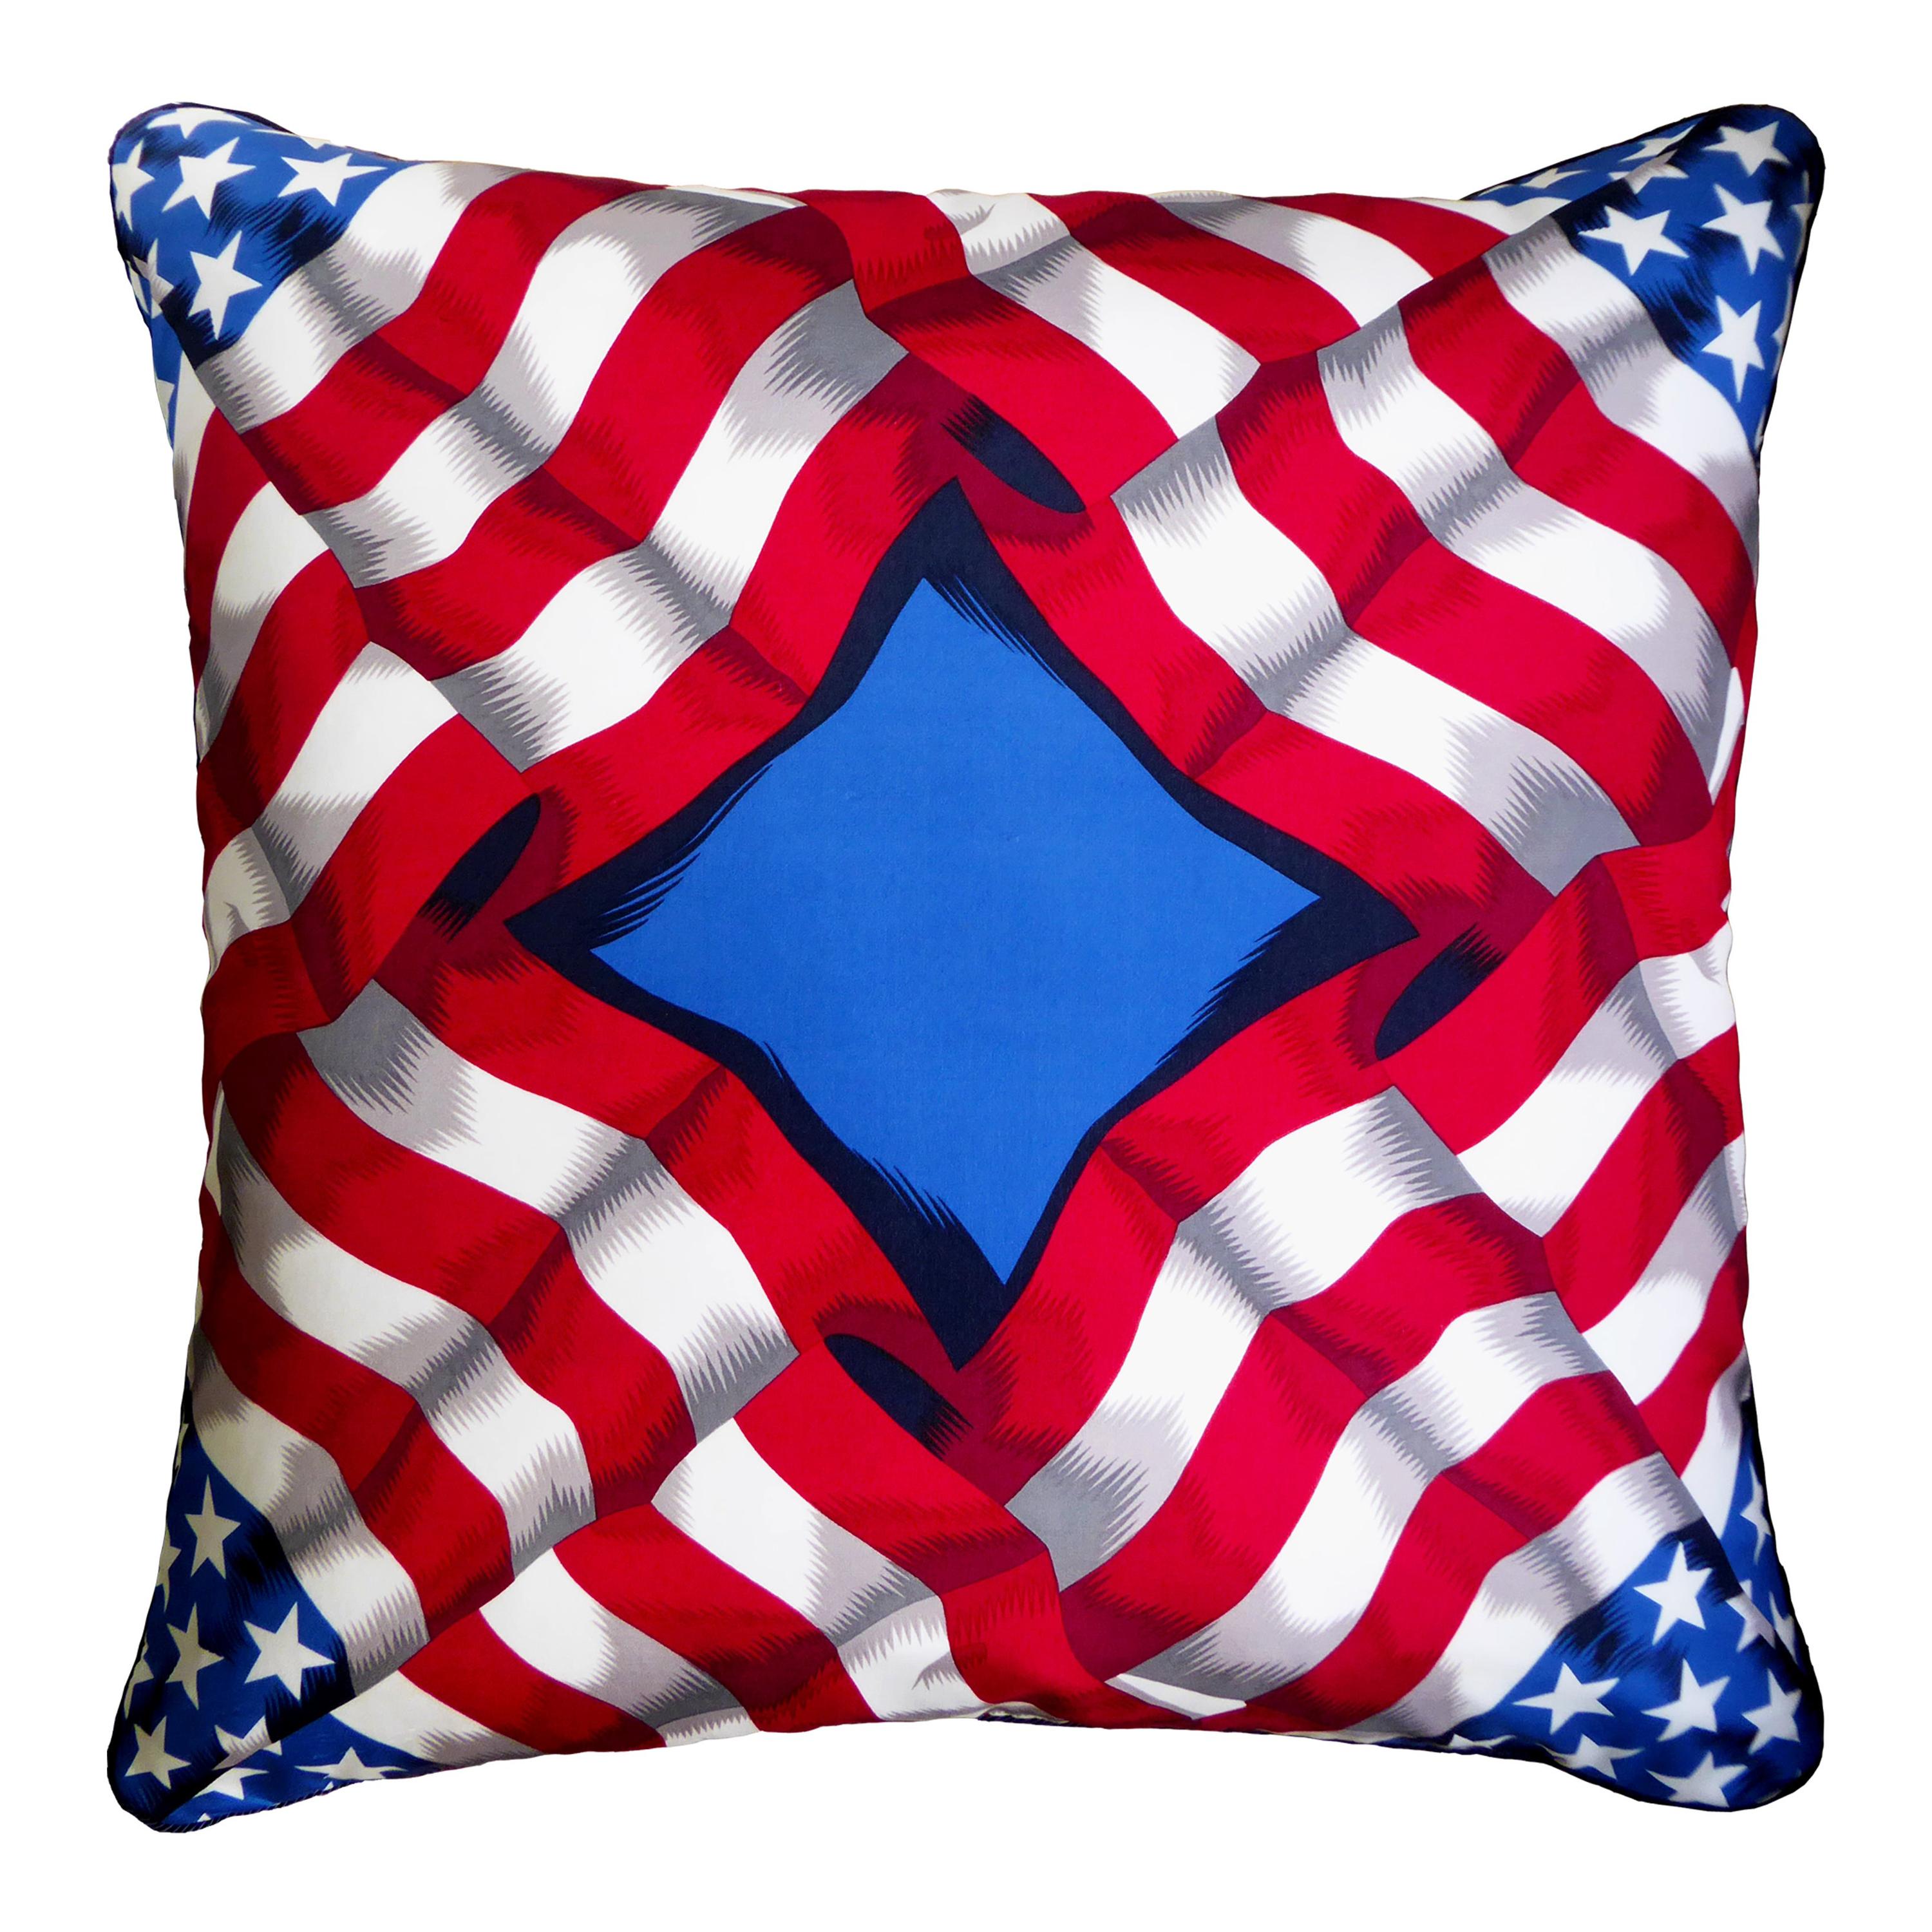 ‘Vintage Cushions’ Luxury Silk pillow 'The Star Spangled Banner' Made in London